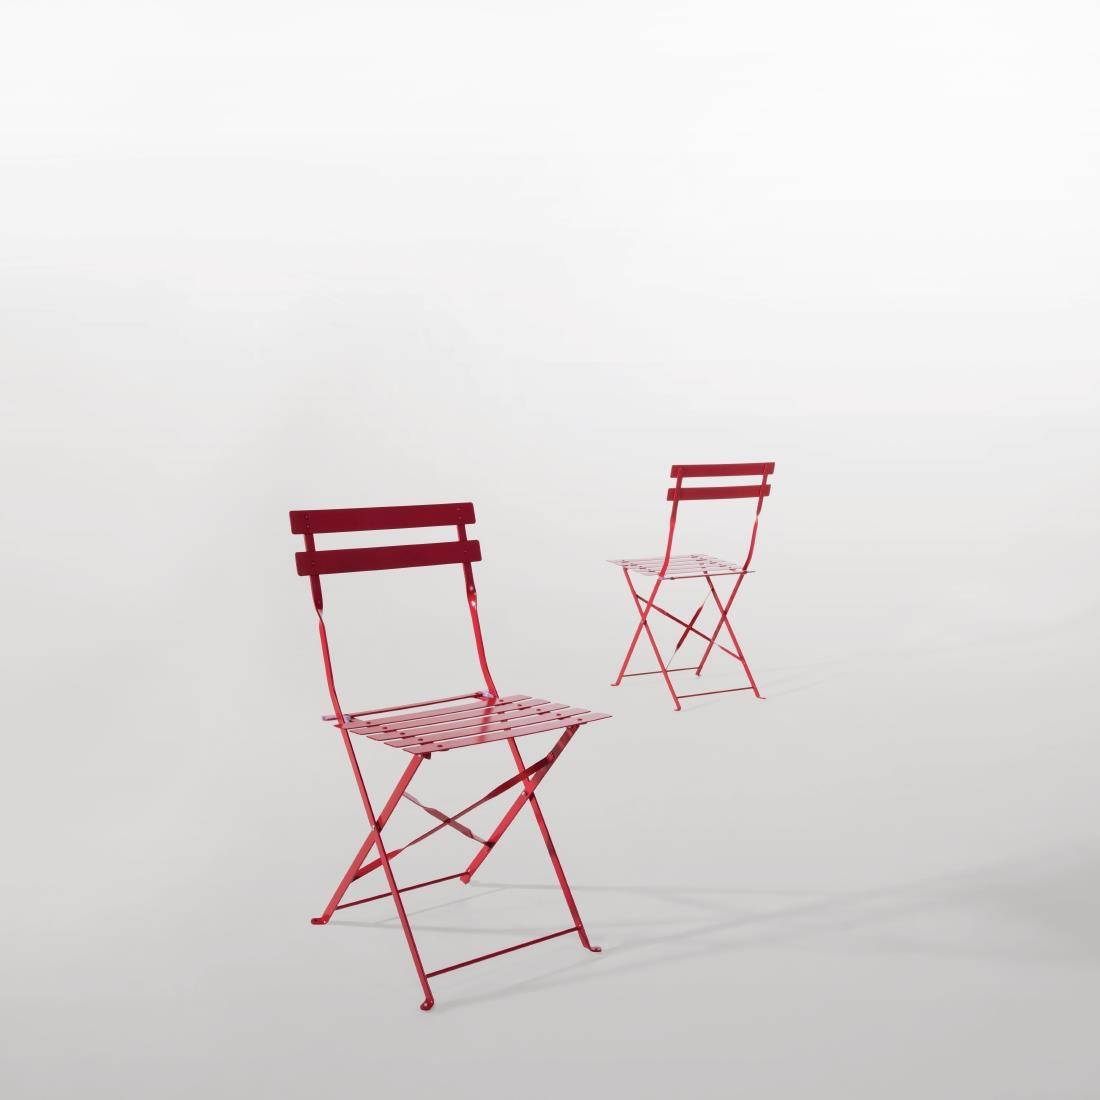 Bolero Red Pavement Style Steel Chairs (Pack of 2) - GH555  - 3